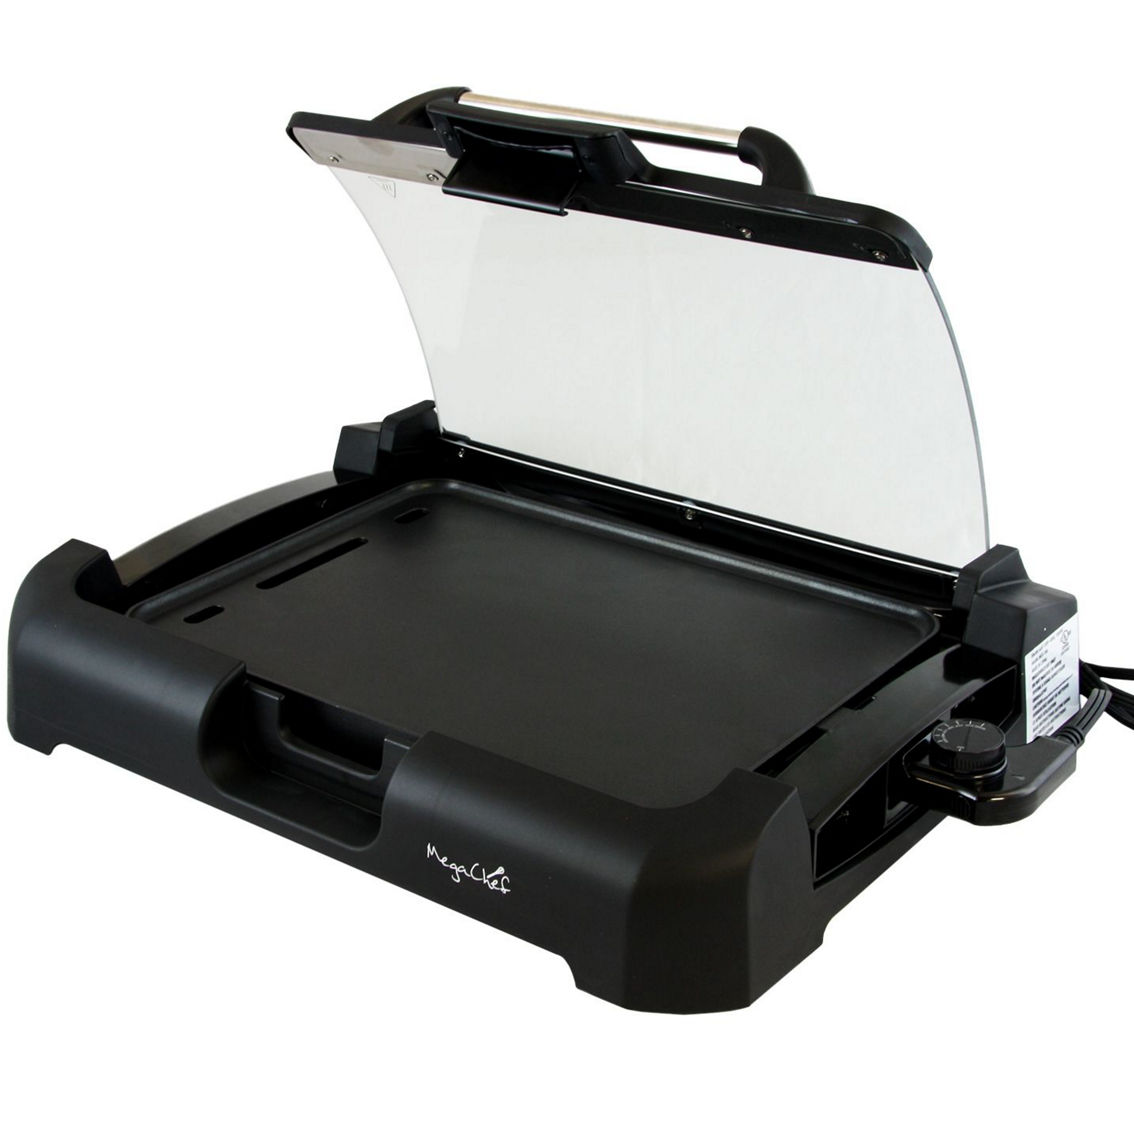 Megachef Reversible Indoor Grill and Griddle with Removable Glass Lid - Image 3 of 5